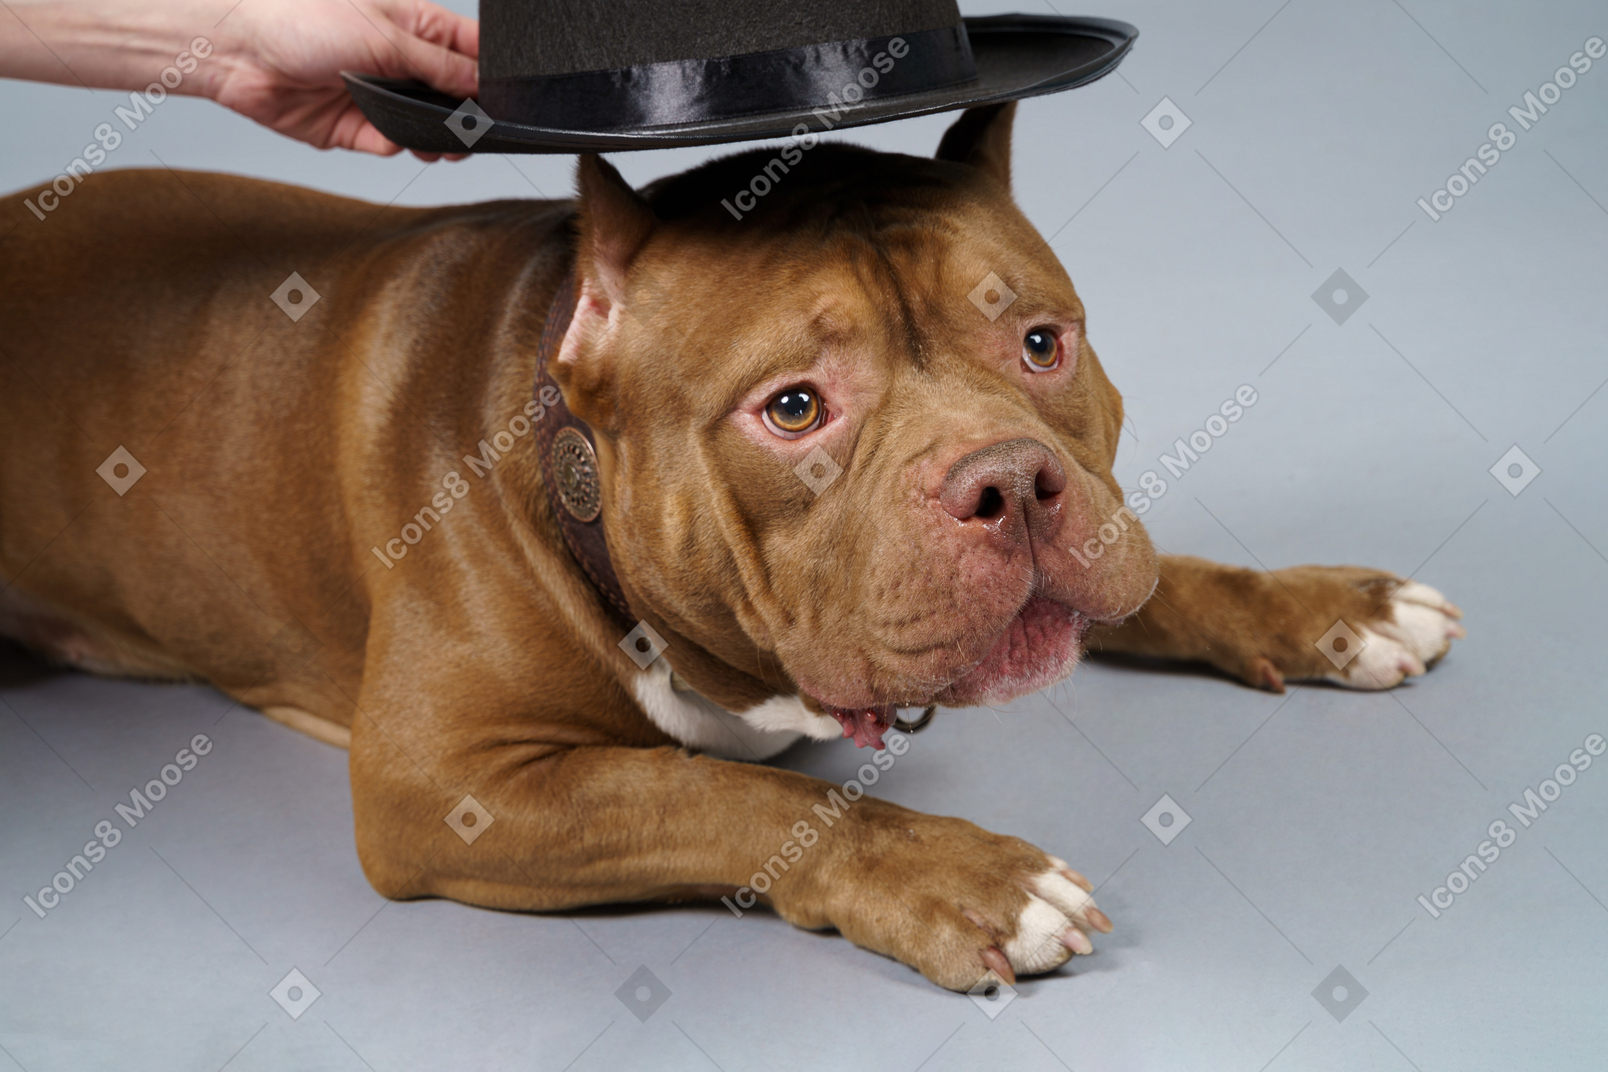 Putting a black hat on a brown bulldog looking aside